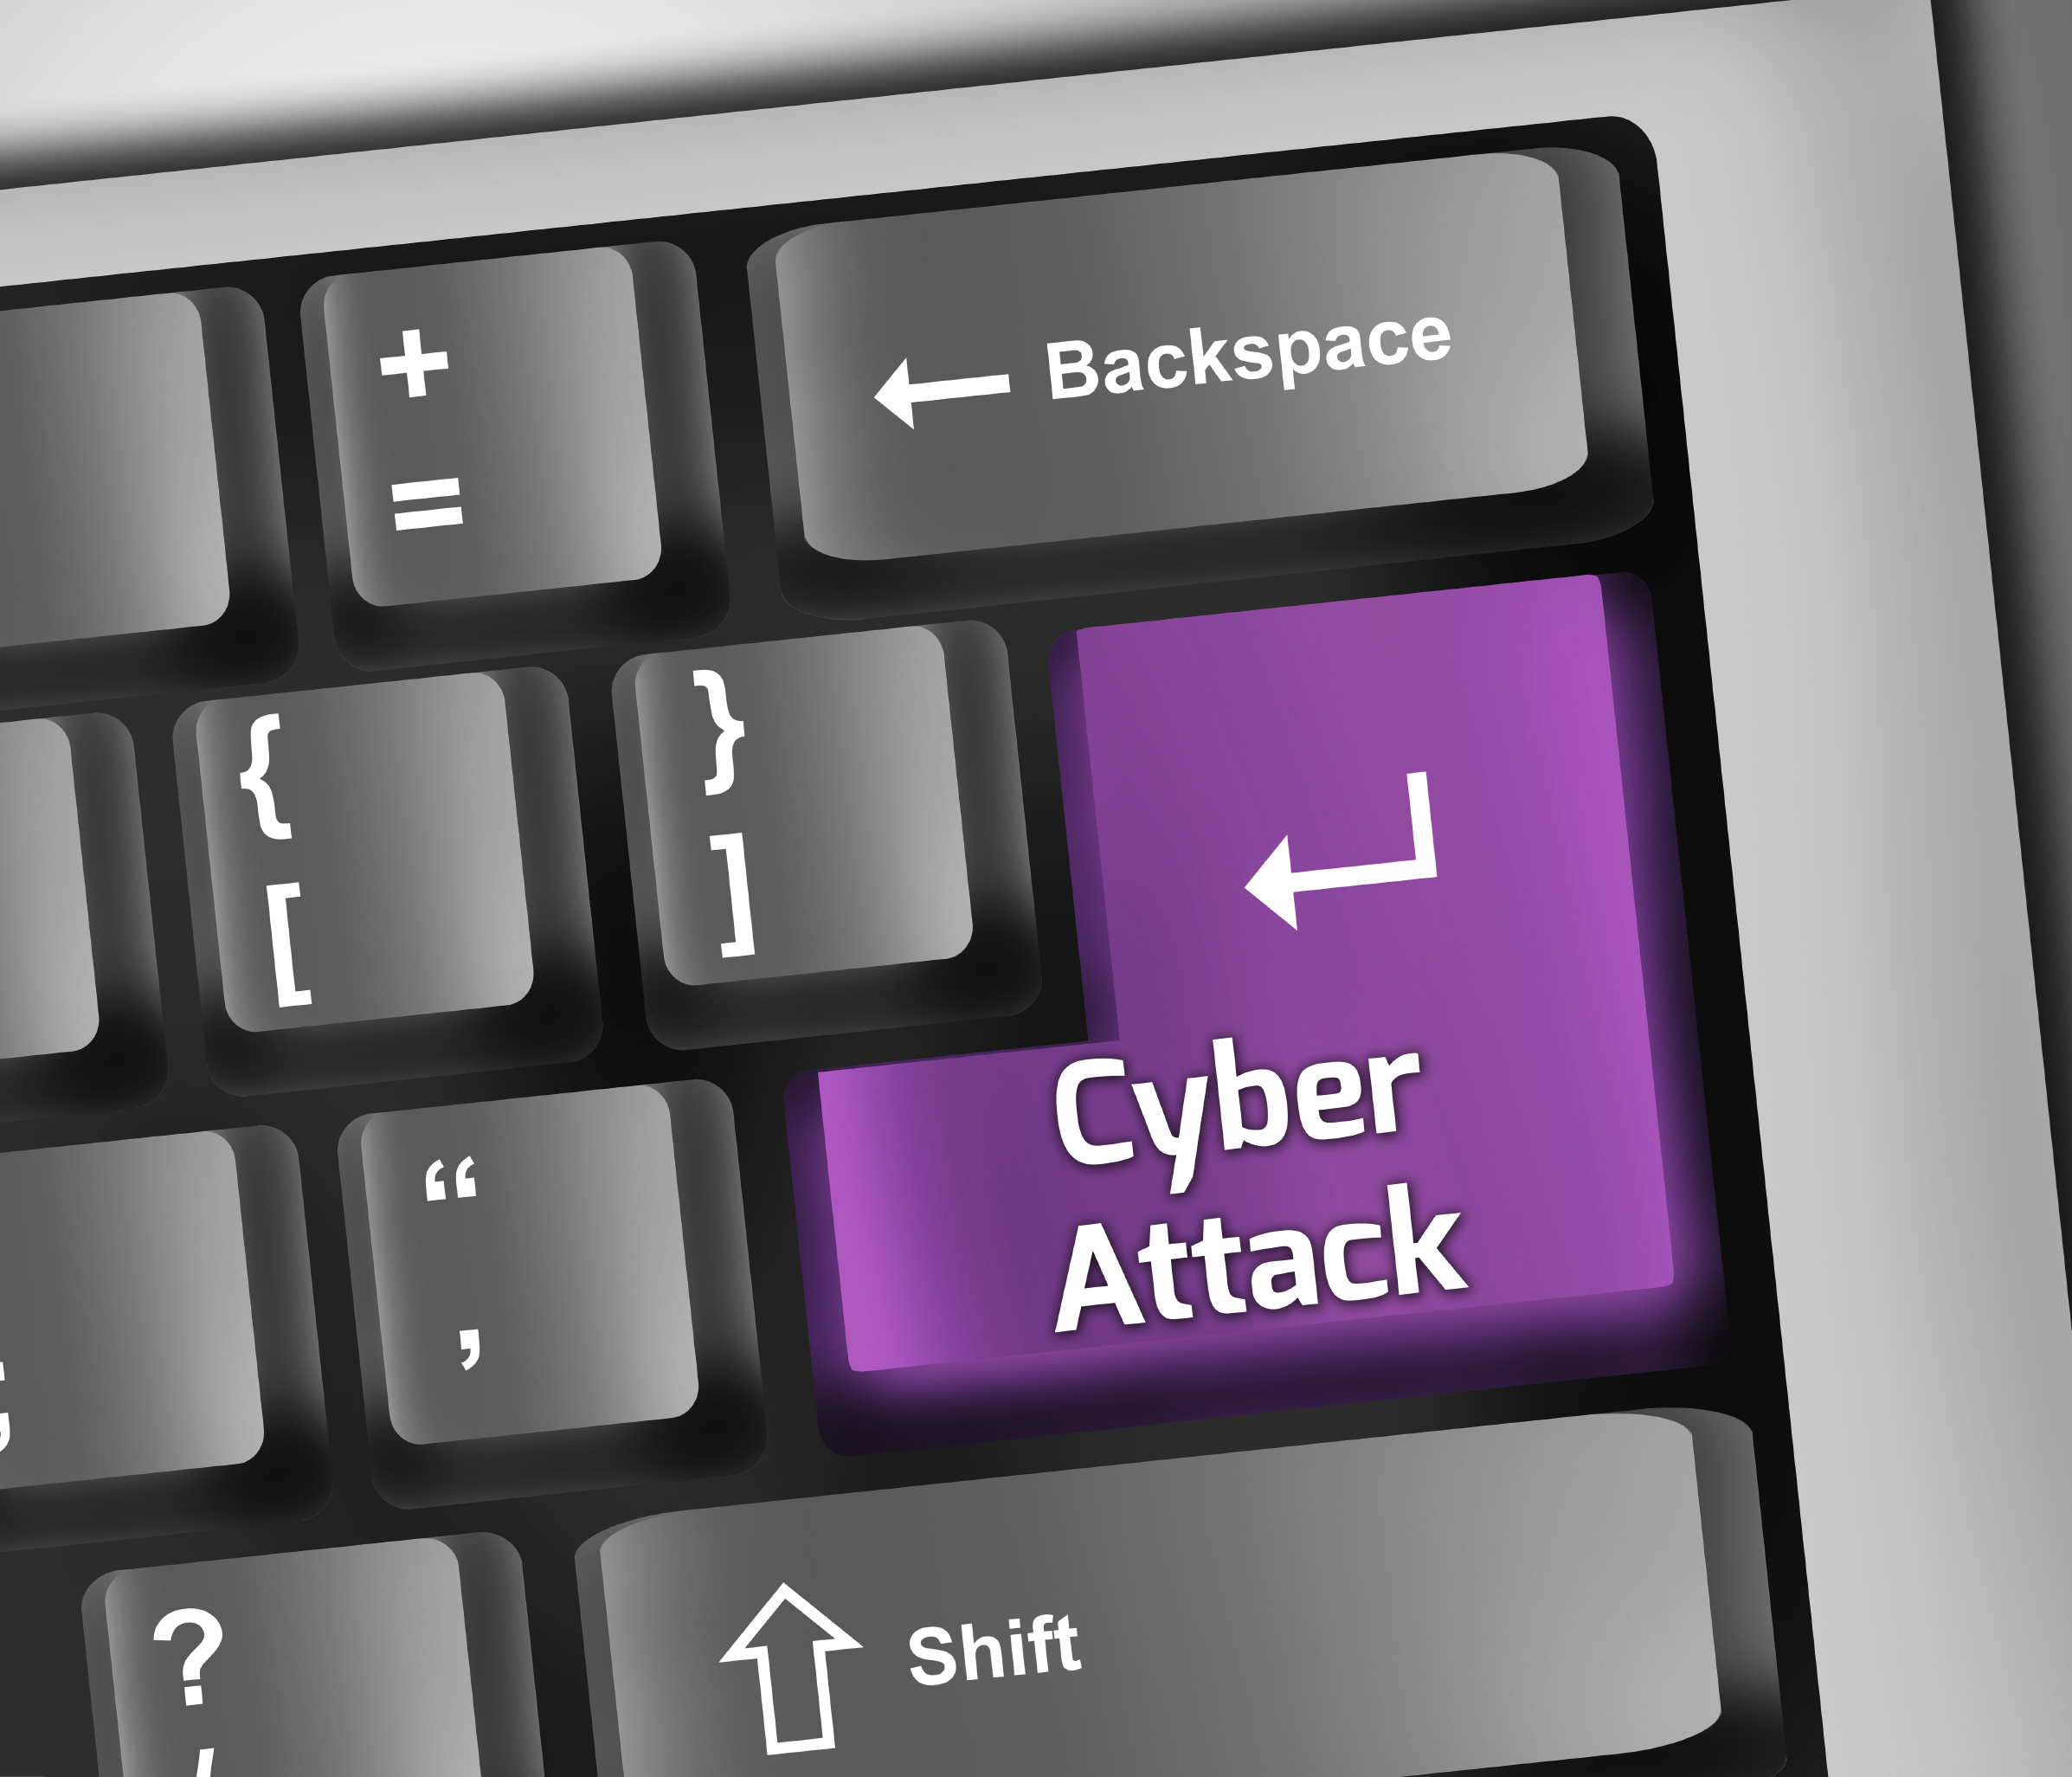 Keyboard Illustration with Cyber Attack wording